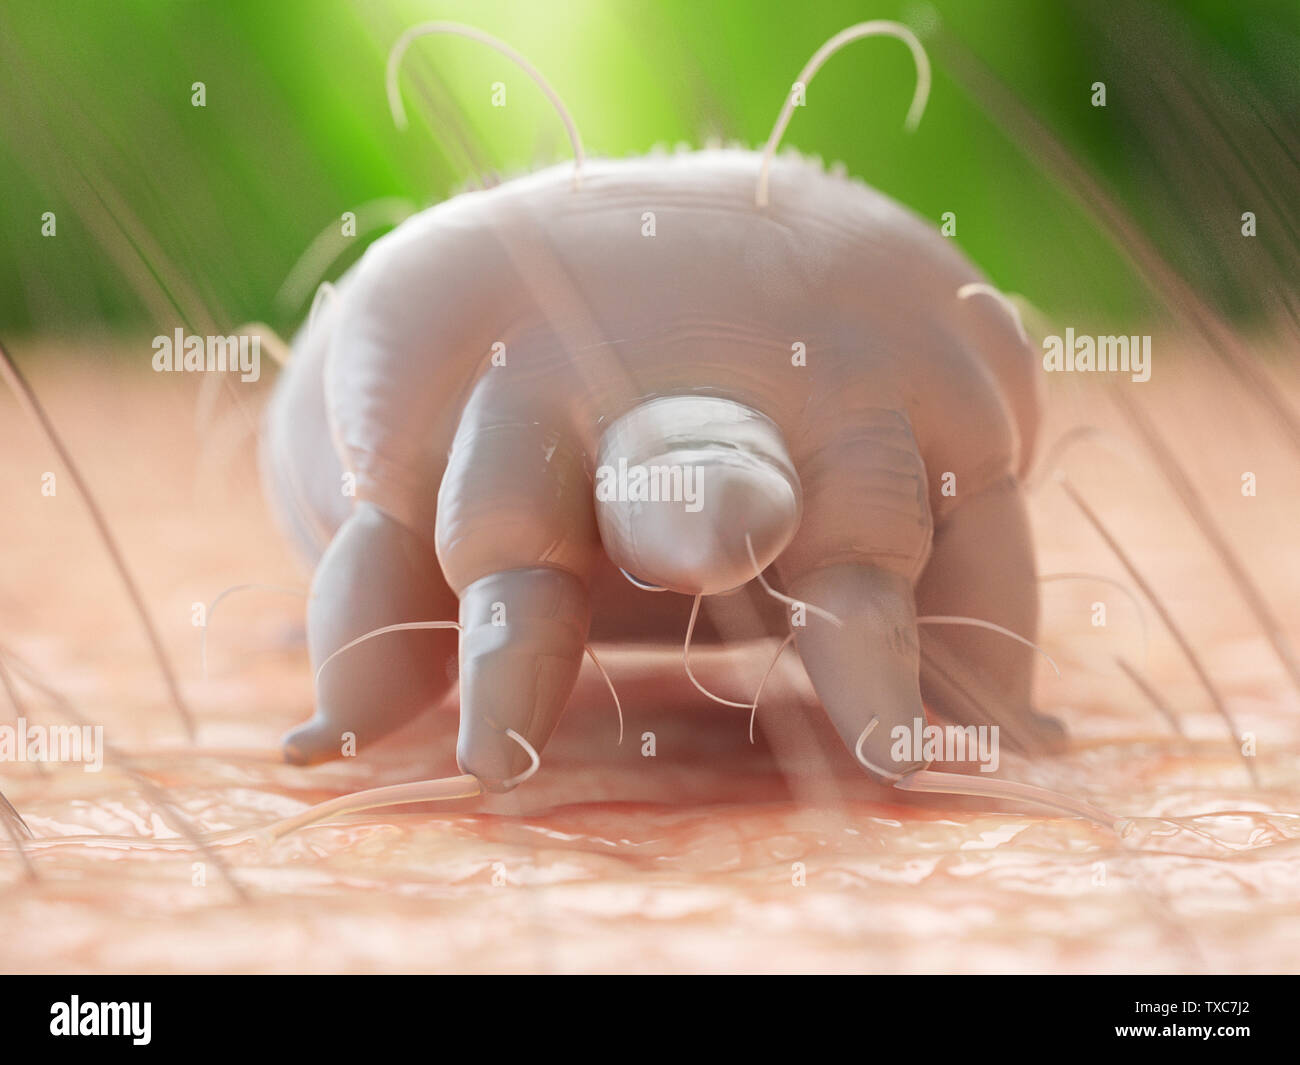 3d rendered medically accurate illustration of a scabies mite on human skin Stock Photo